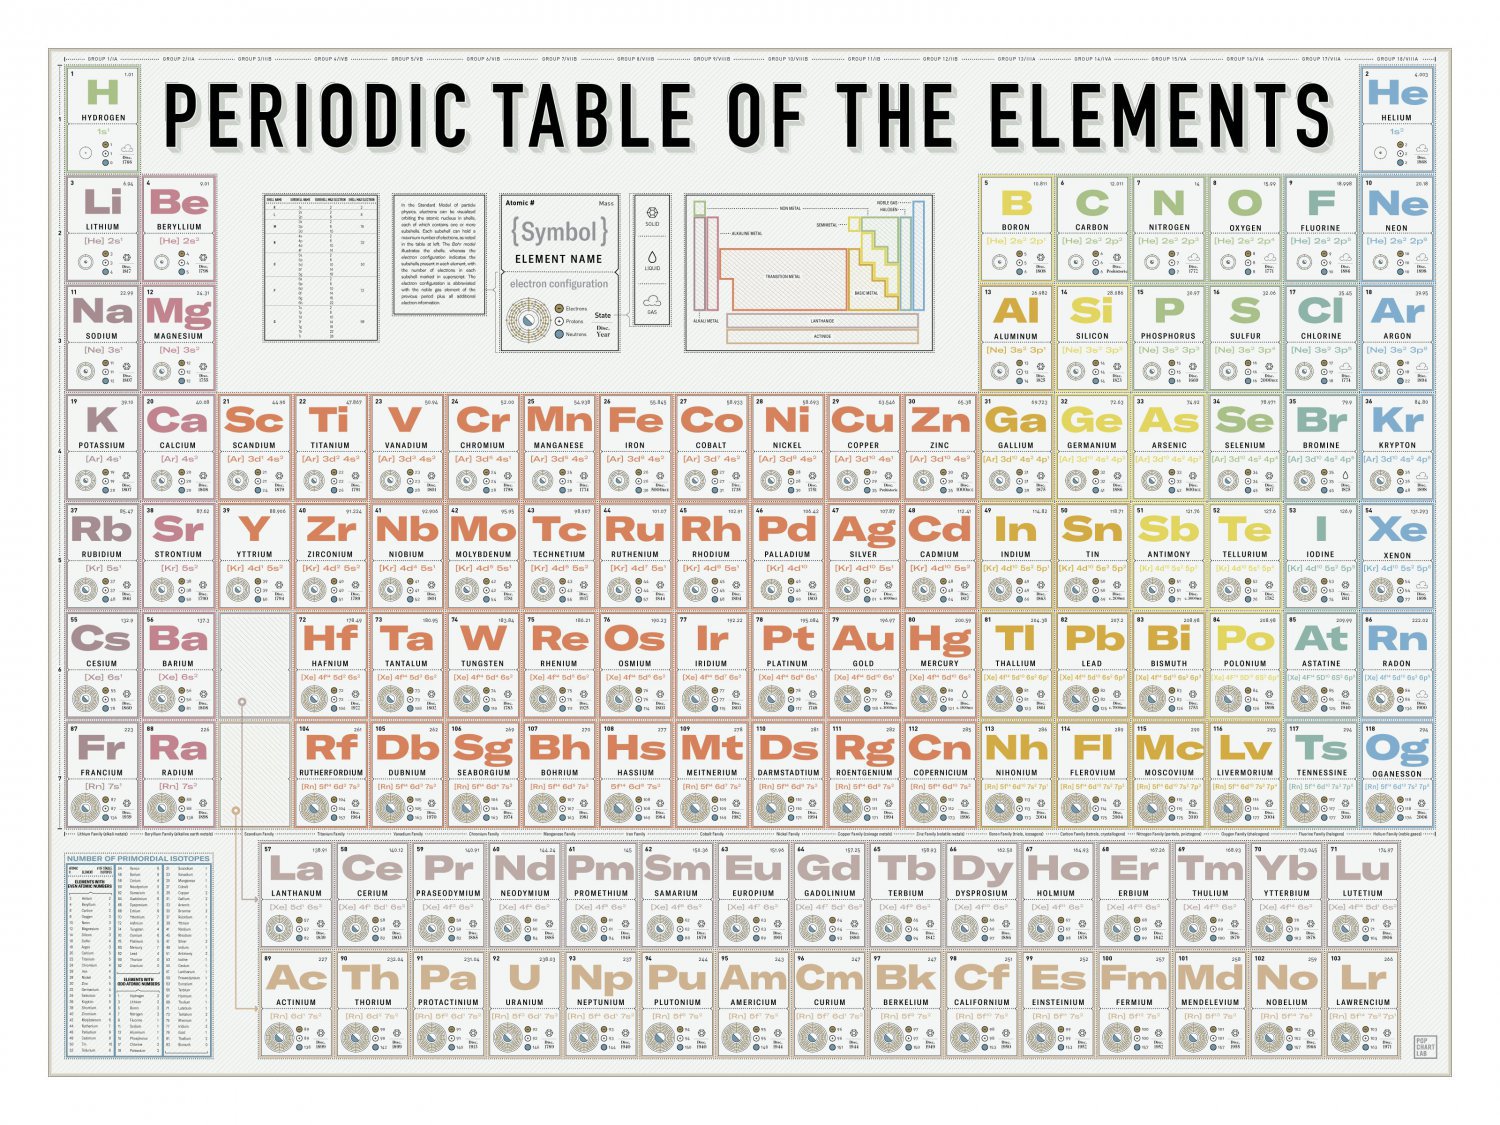 Periodic Table of the Elements Infographic Chart 13"x19" (32cm/49cm) Polyester Fabric Poster